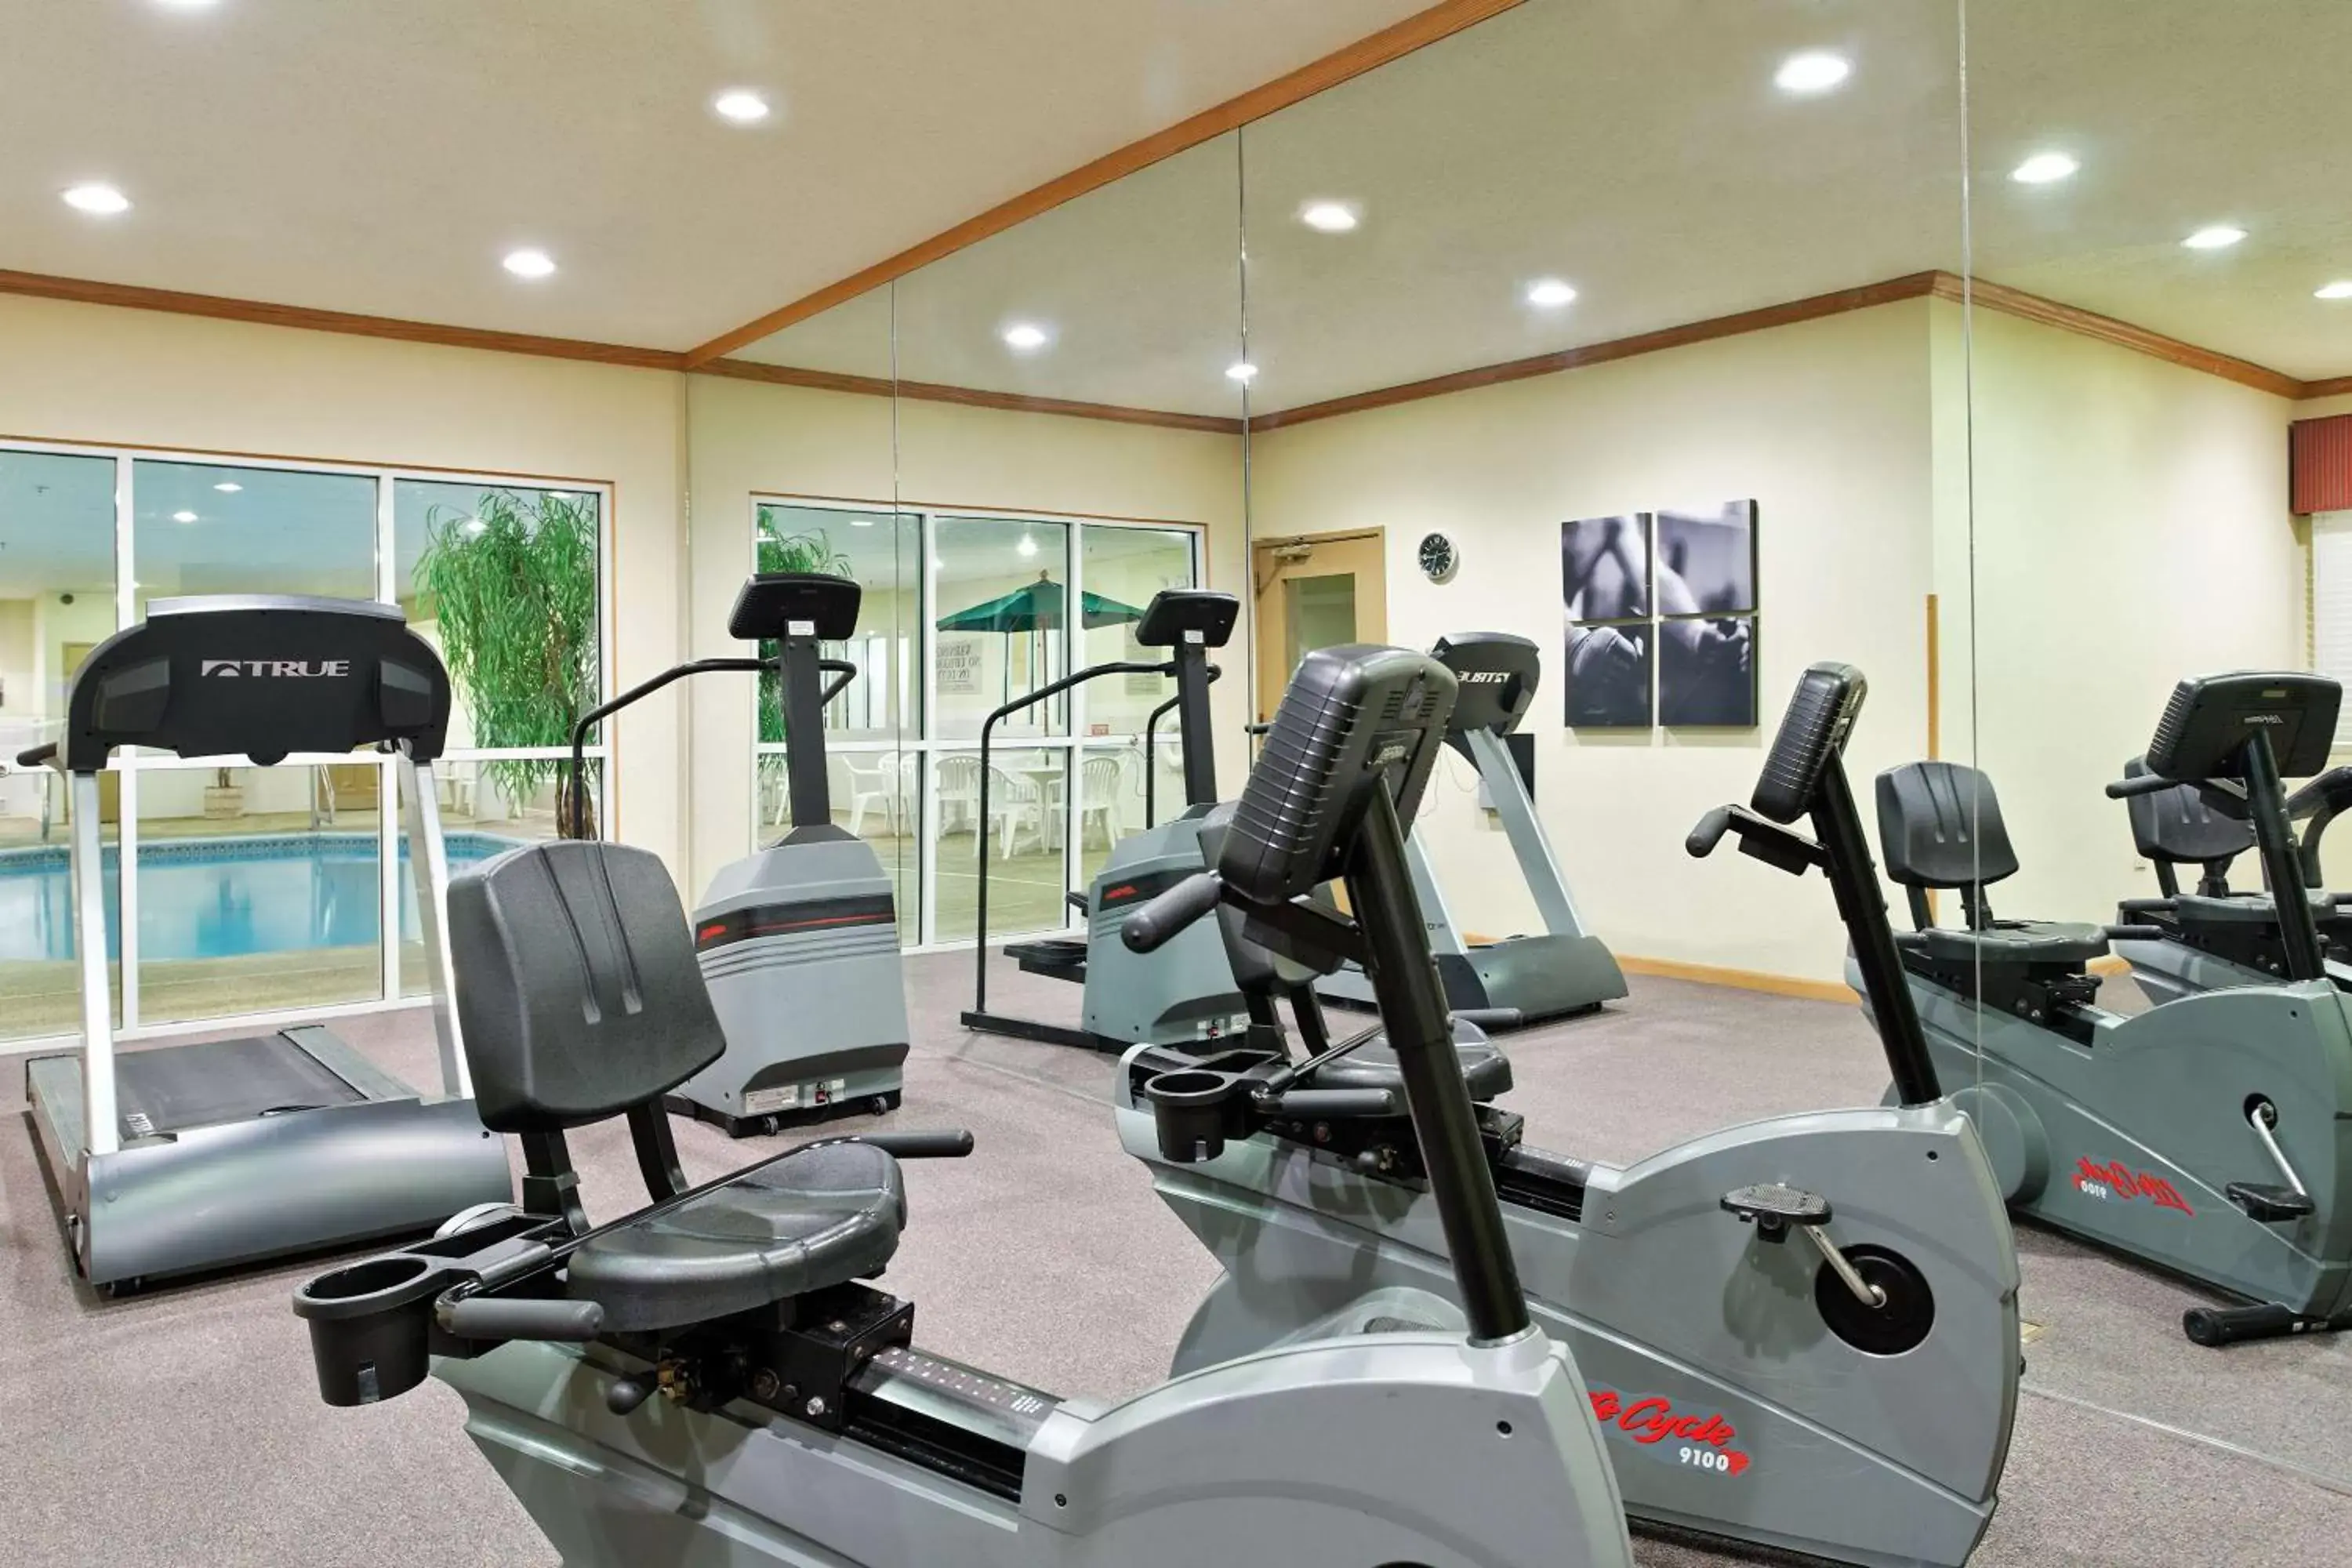 Activities, Fitness Center/Facilities in Country Inn & Suites by Radisson, Rock Falls, IL